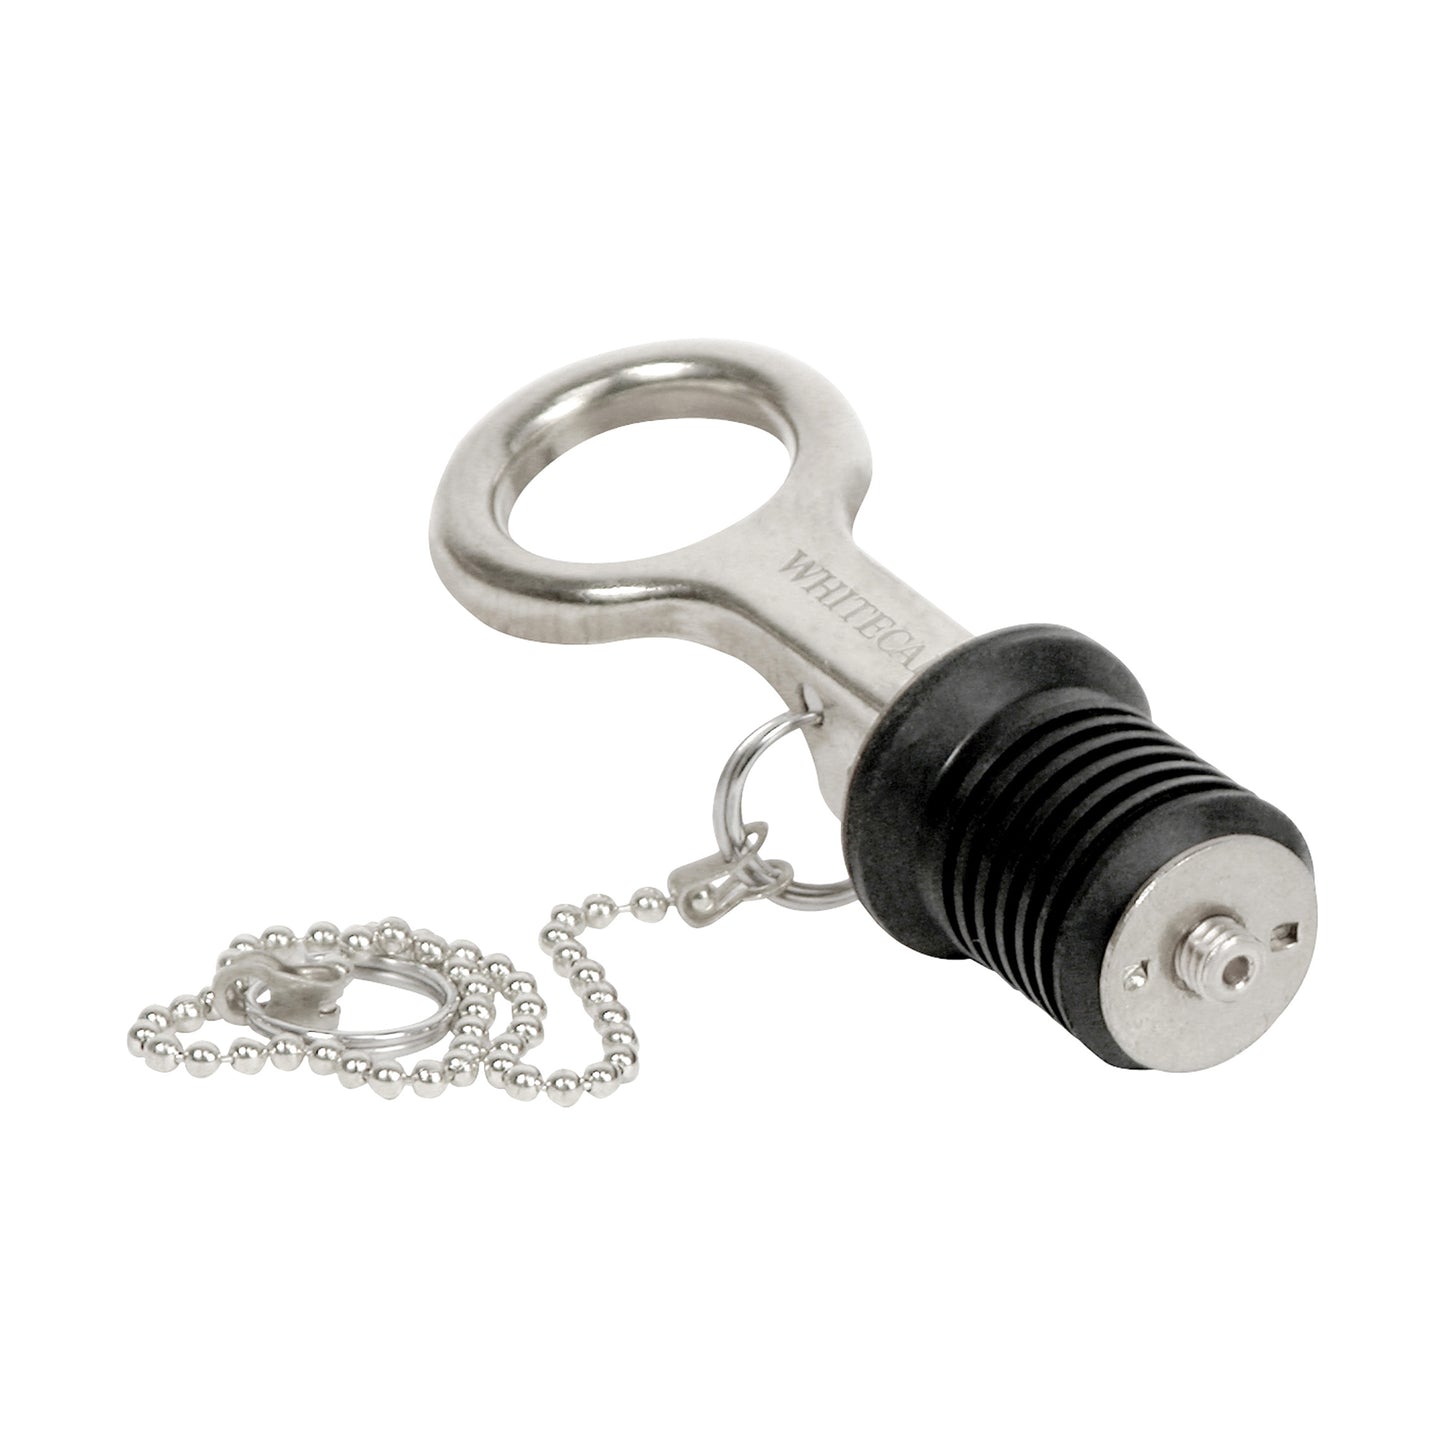 Aluminum w/ Stainless Steel Snap/Lever Type Bailer Plug with 8" Chain